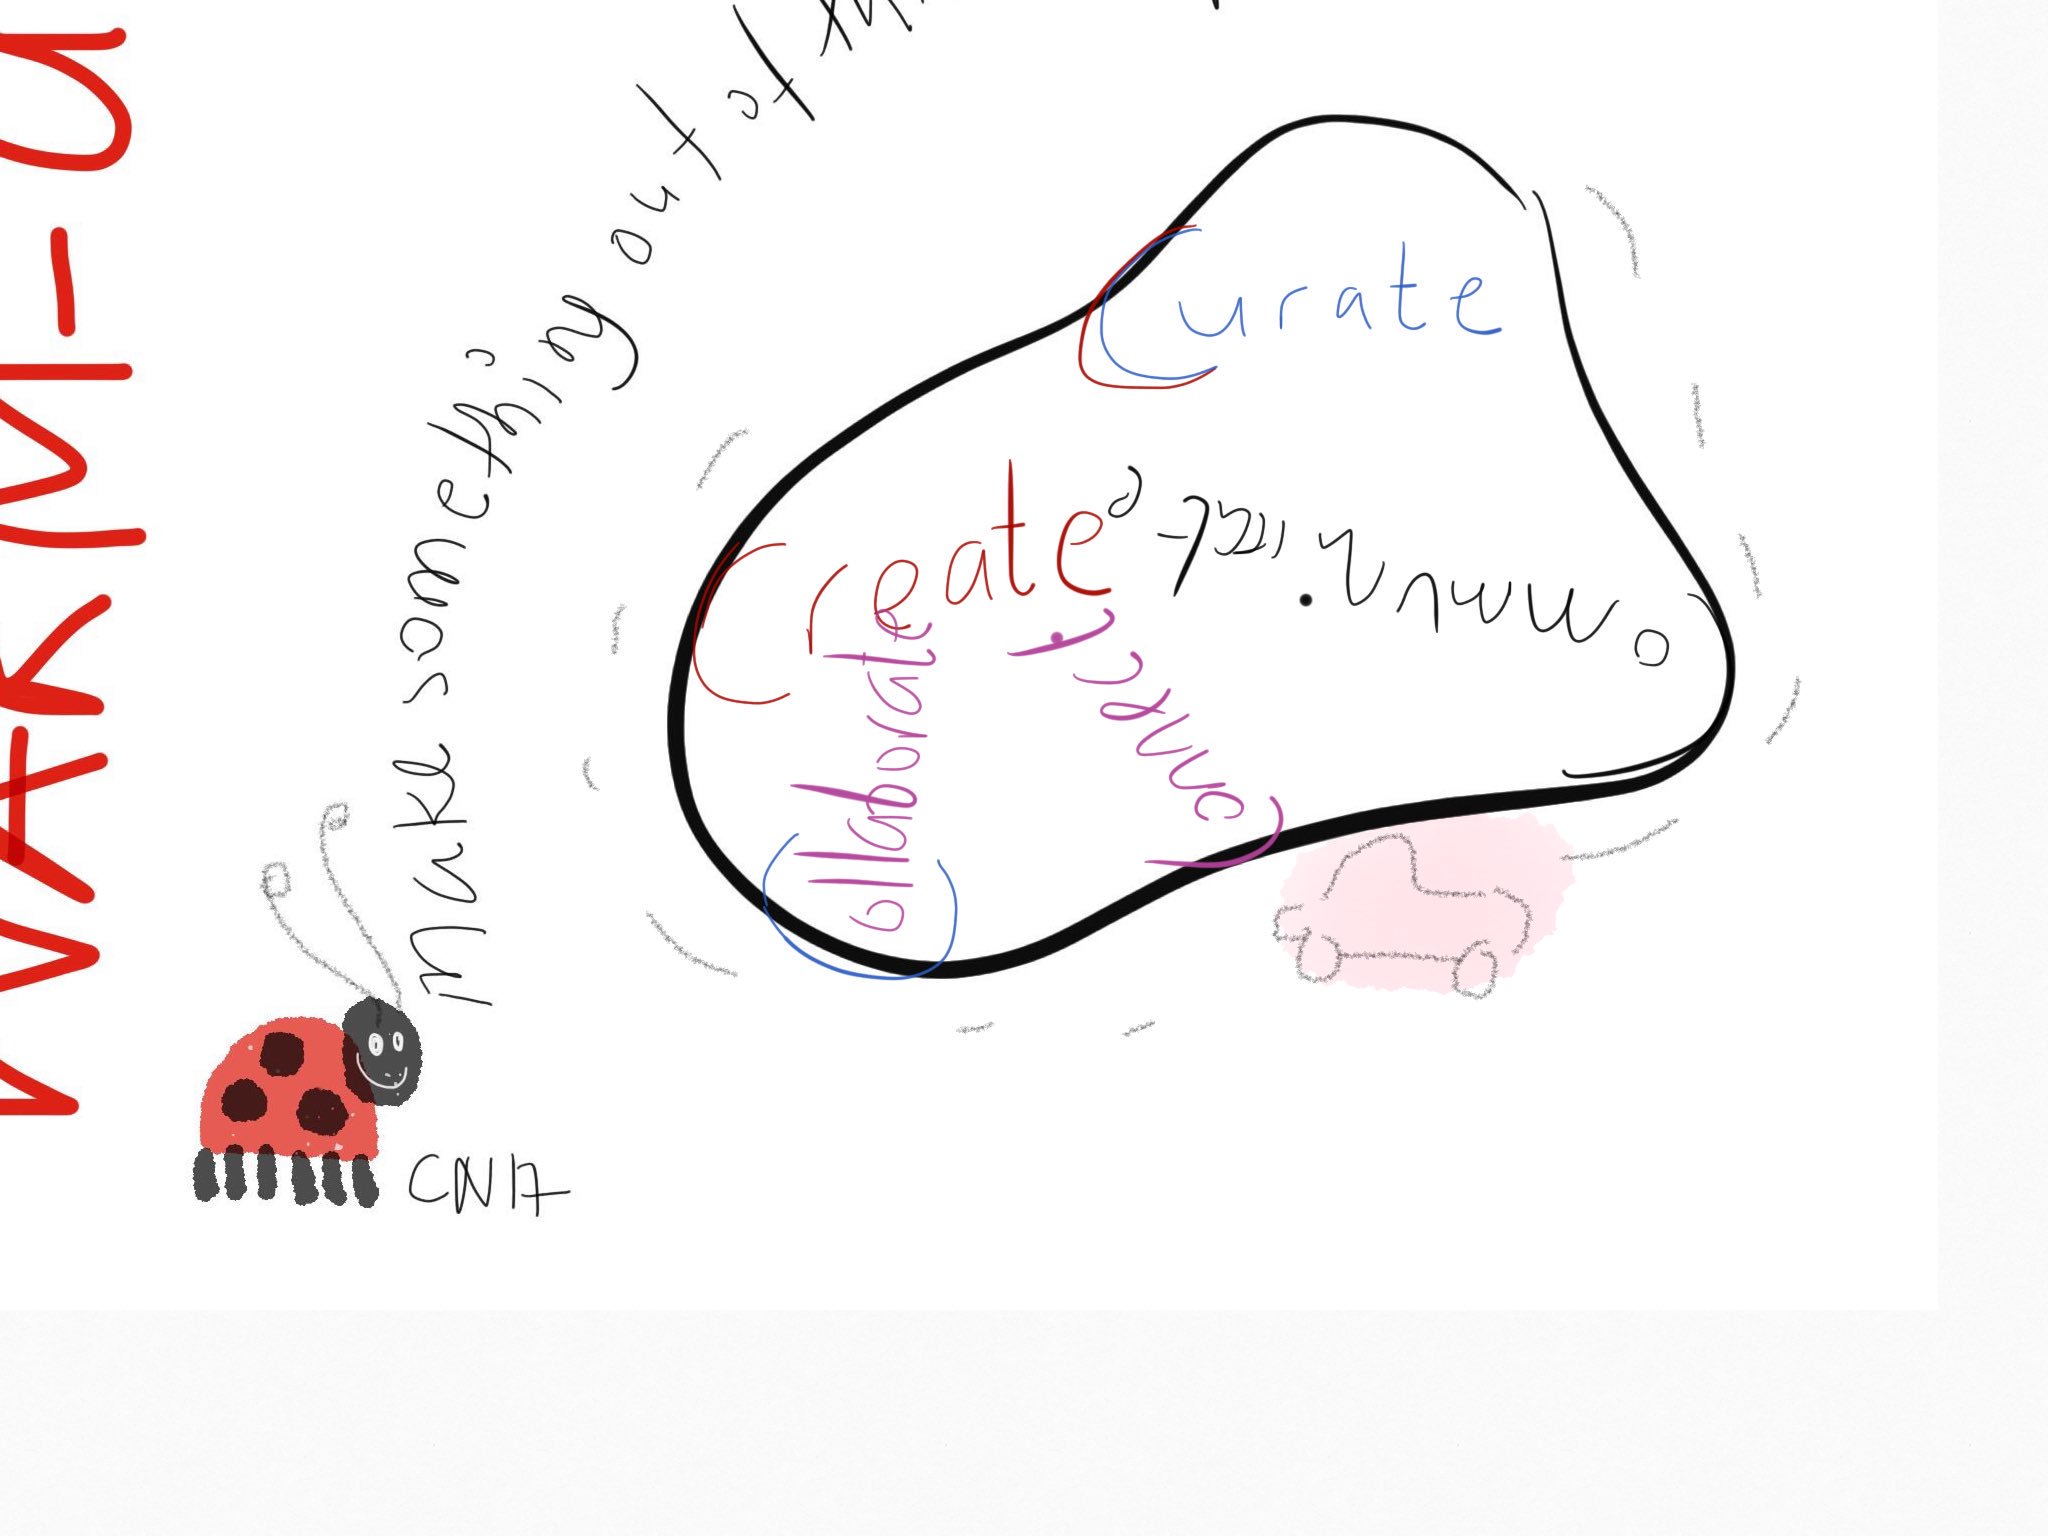 #byod4lchat #creativeHE a little late, so rushed, https://t.co/t2R8NYNbYq